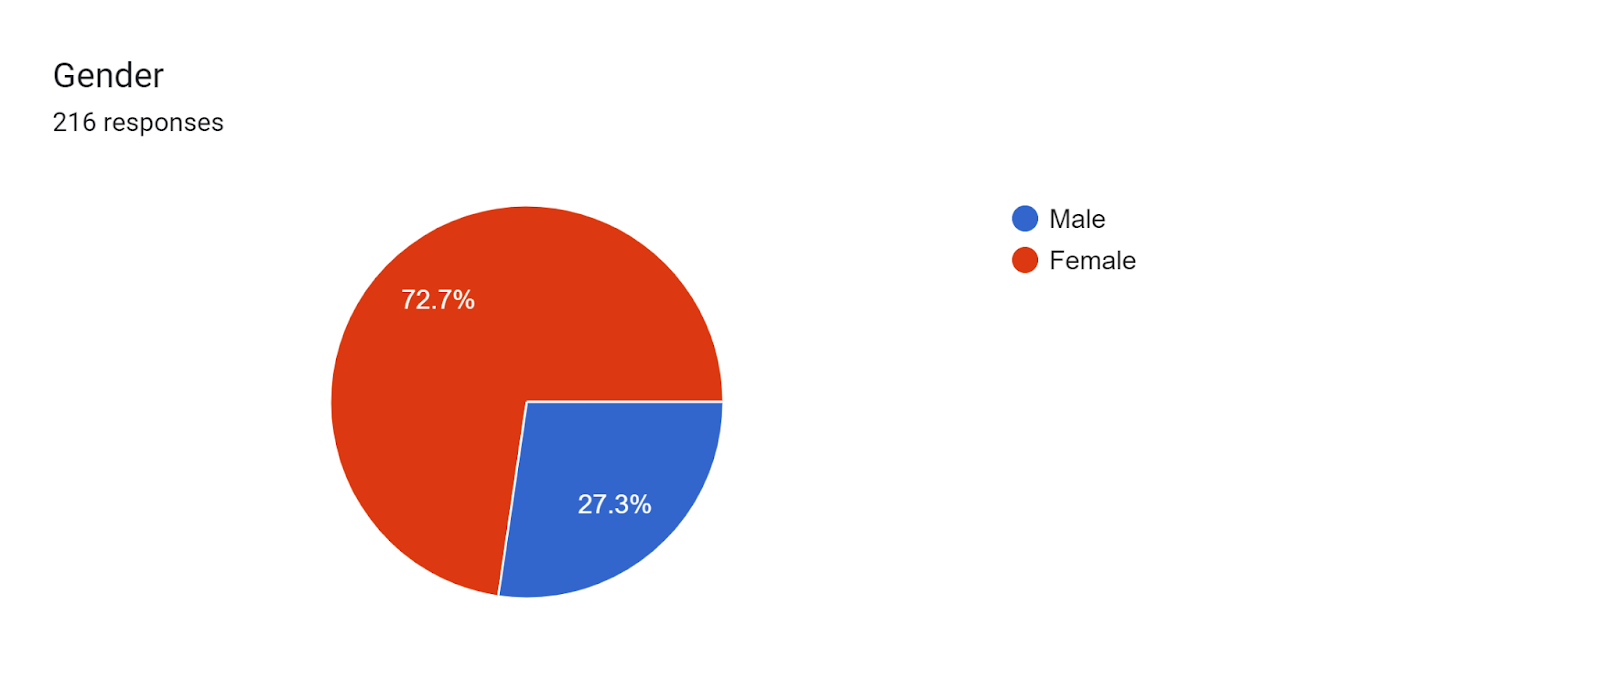 Forms response chart. Question title: Gender. Number of responses: 216 responses.